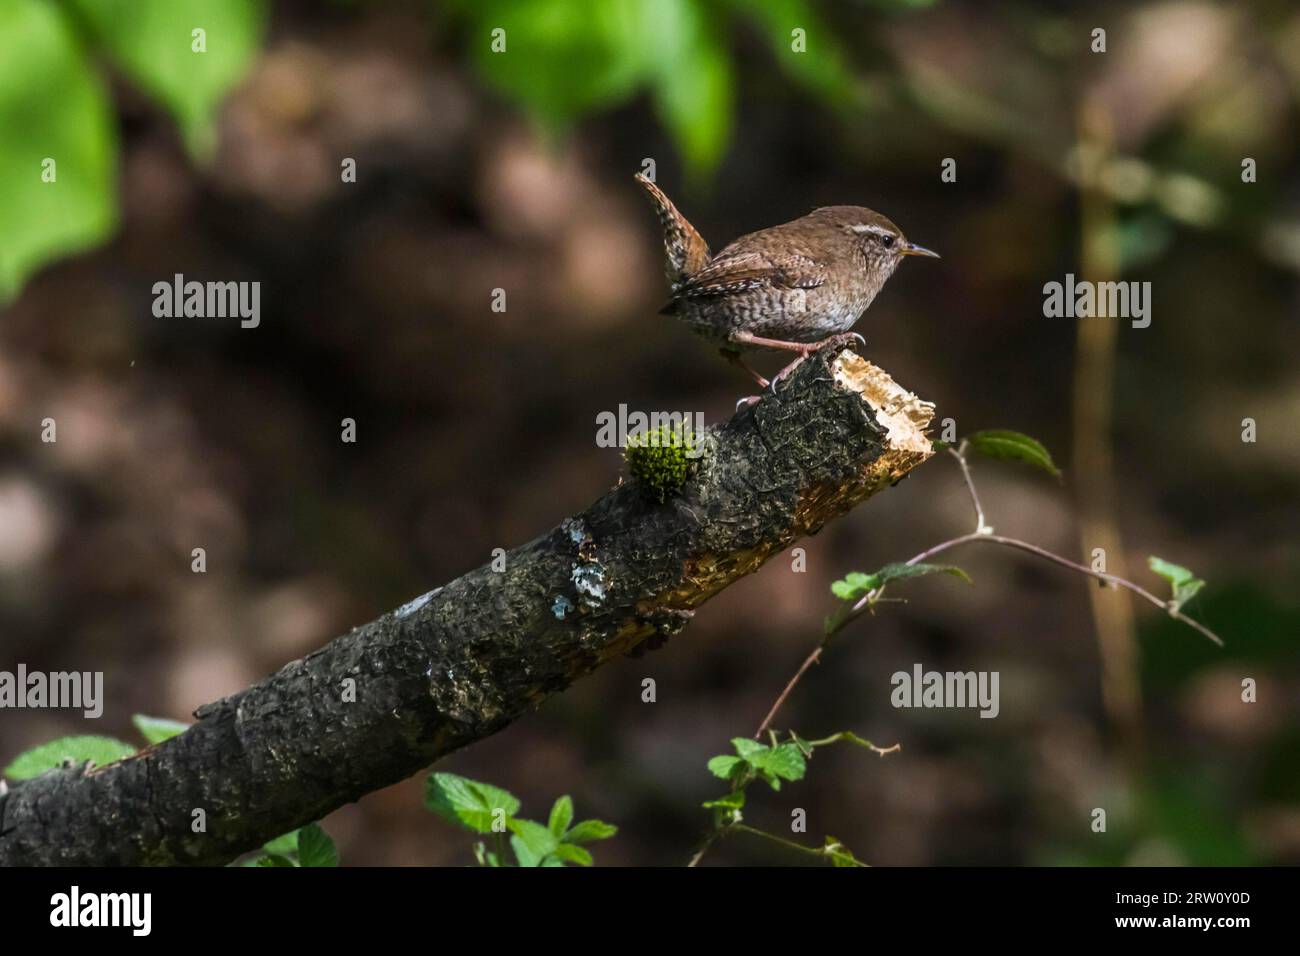 A wren in search of food, A wren is sitting on a branch Stock Photo